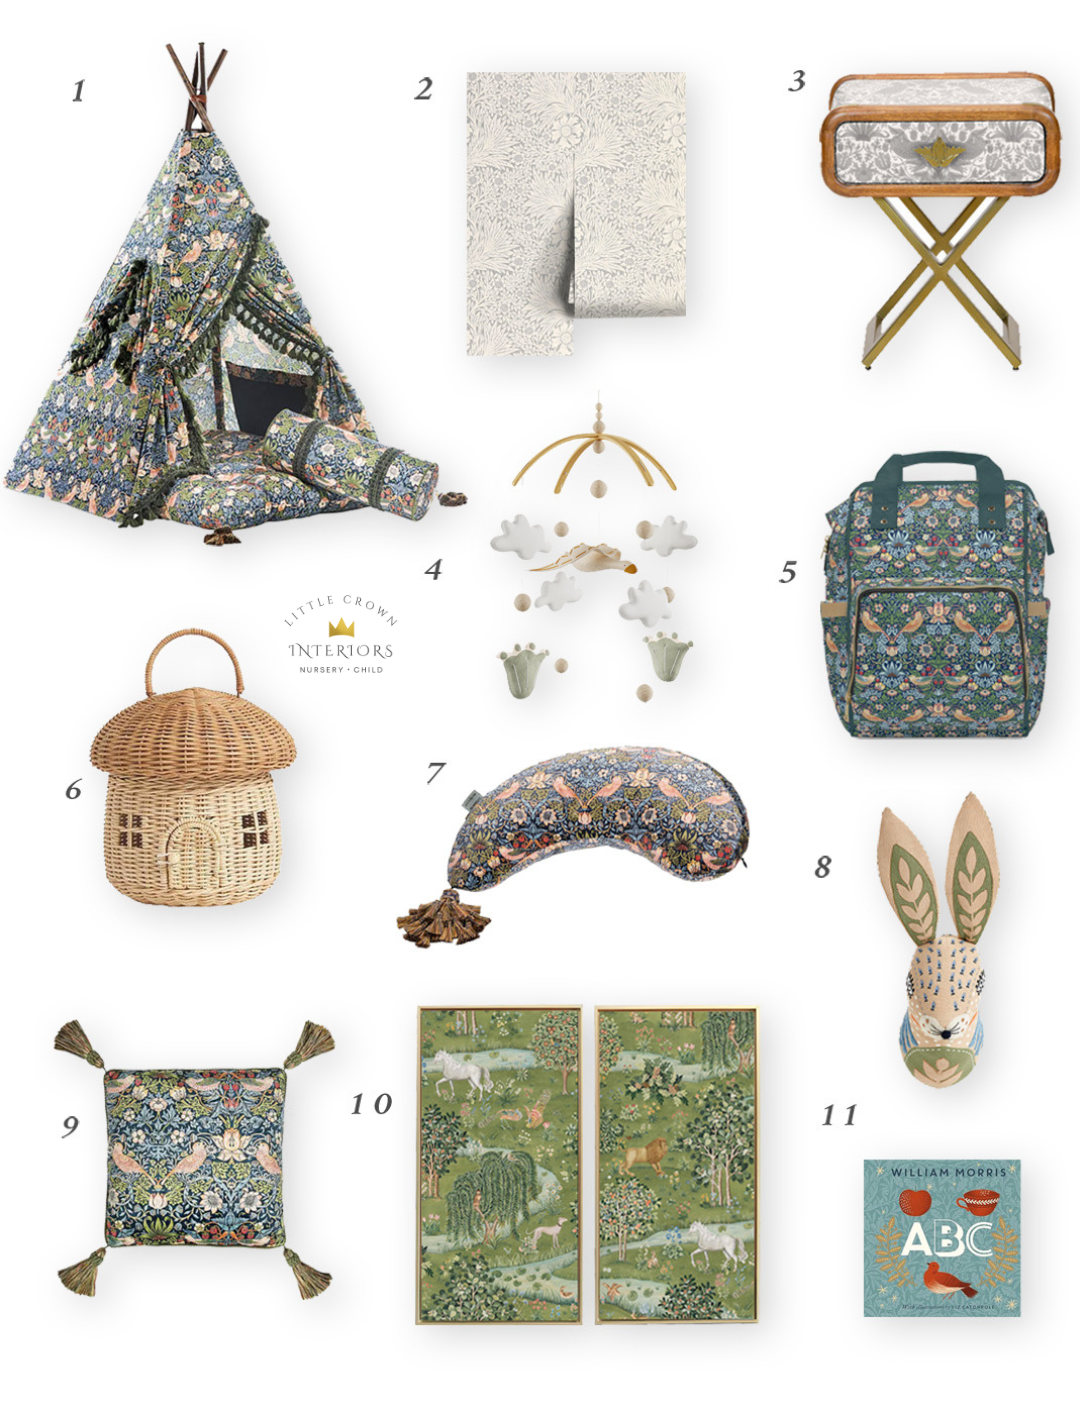 William Morris Nursery Decor and Products